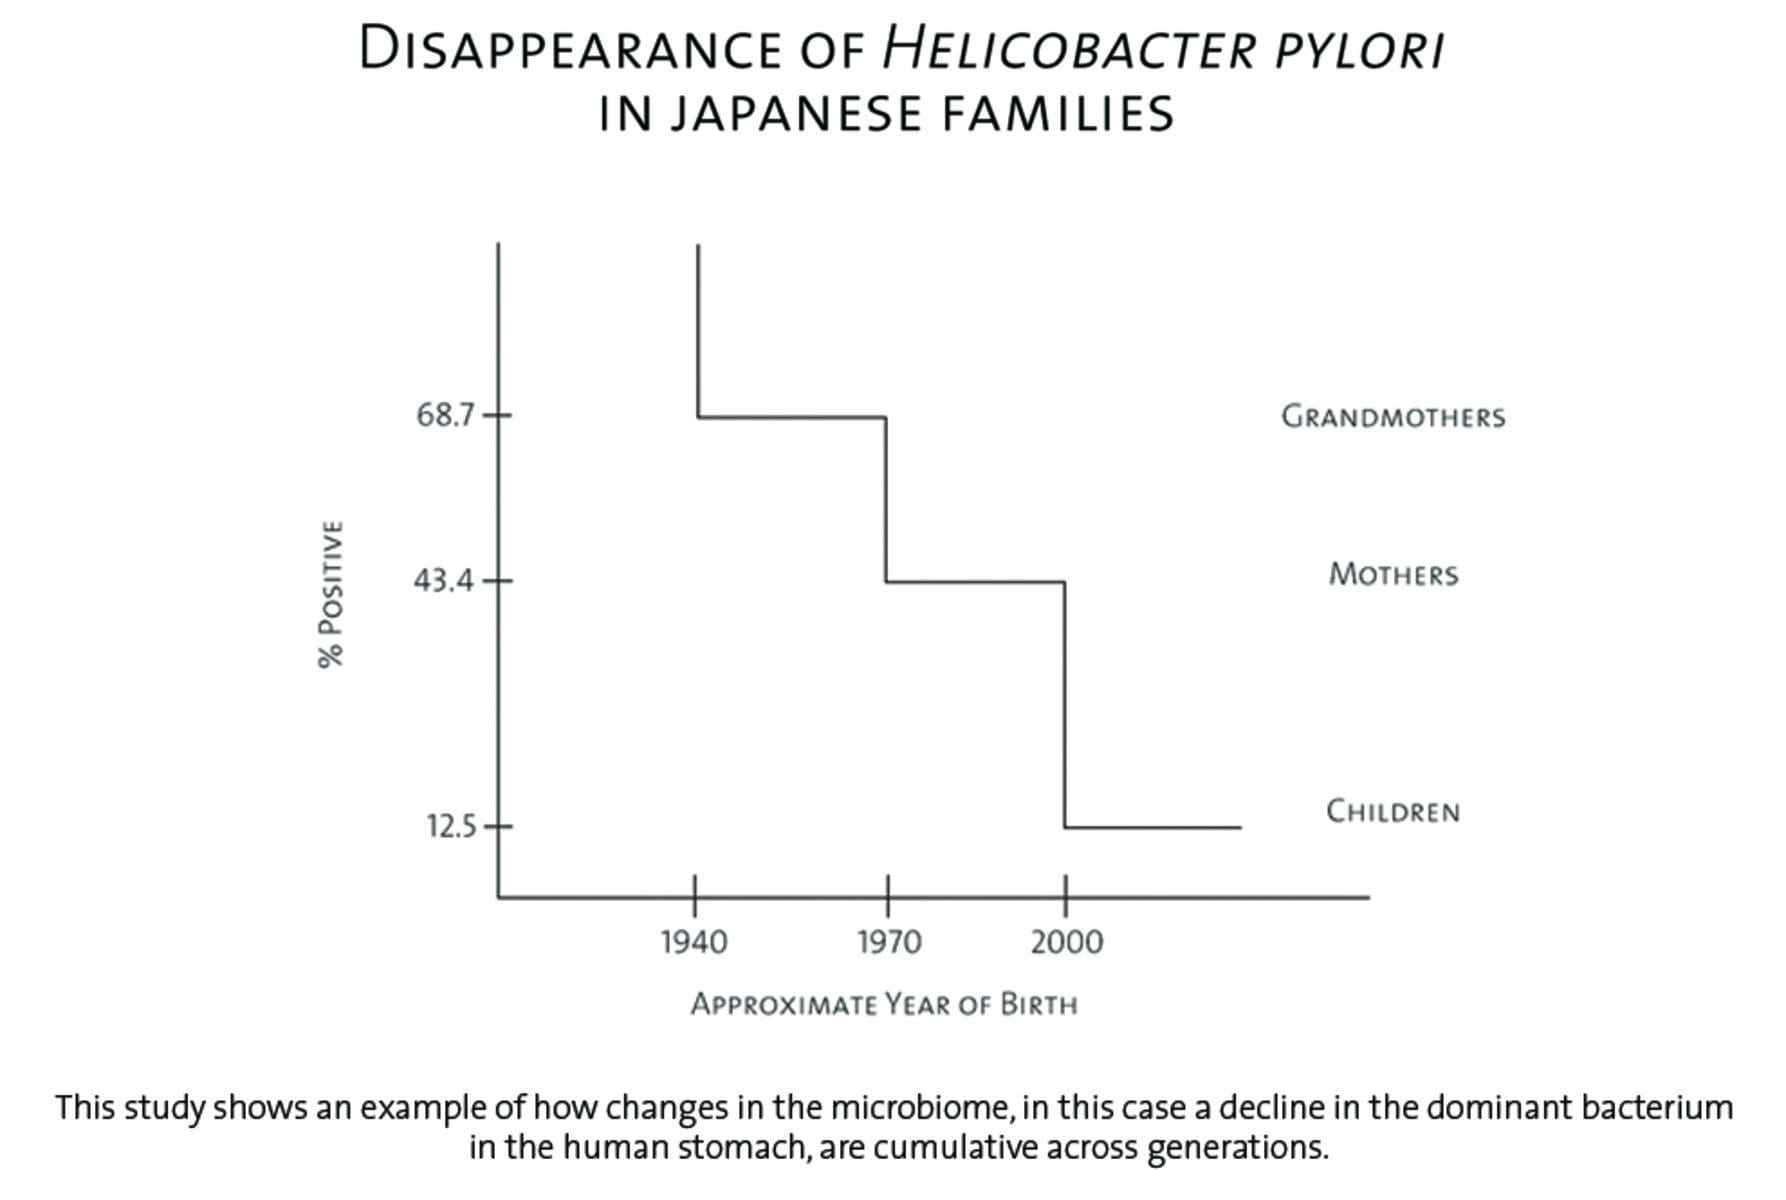 A graph titled, “Disappearance of Helicobacter pylori in Japanese families” shows a decline in the dominant bacterium in the human stomach across three generations.